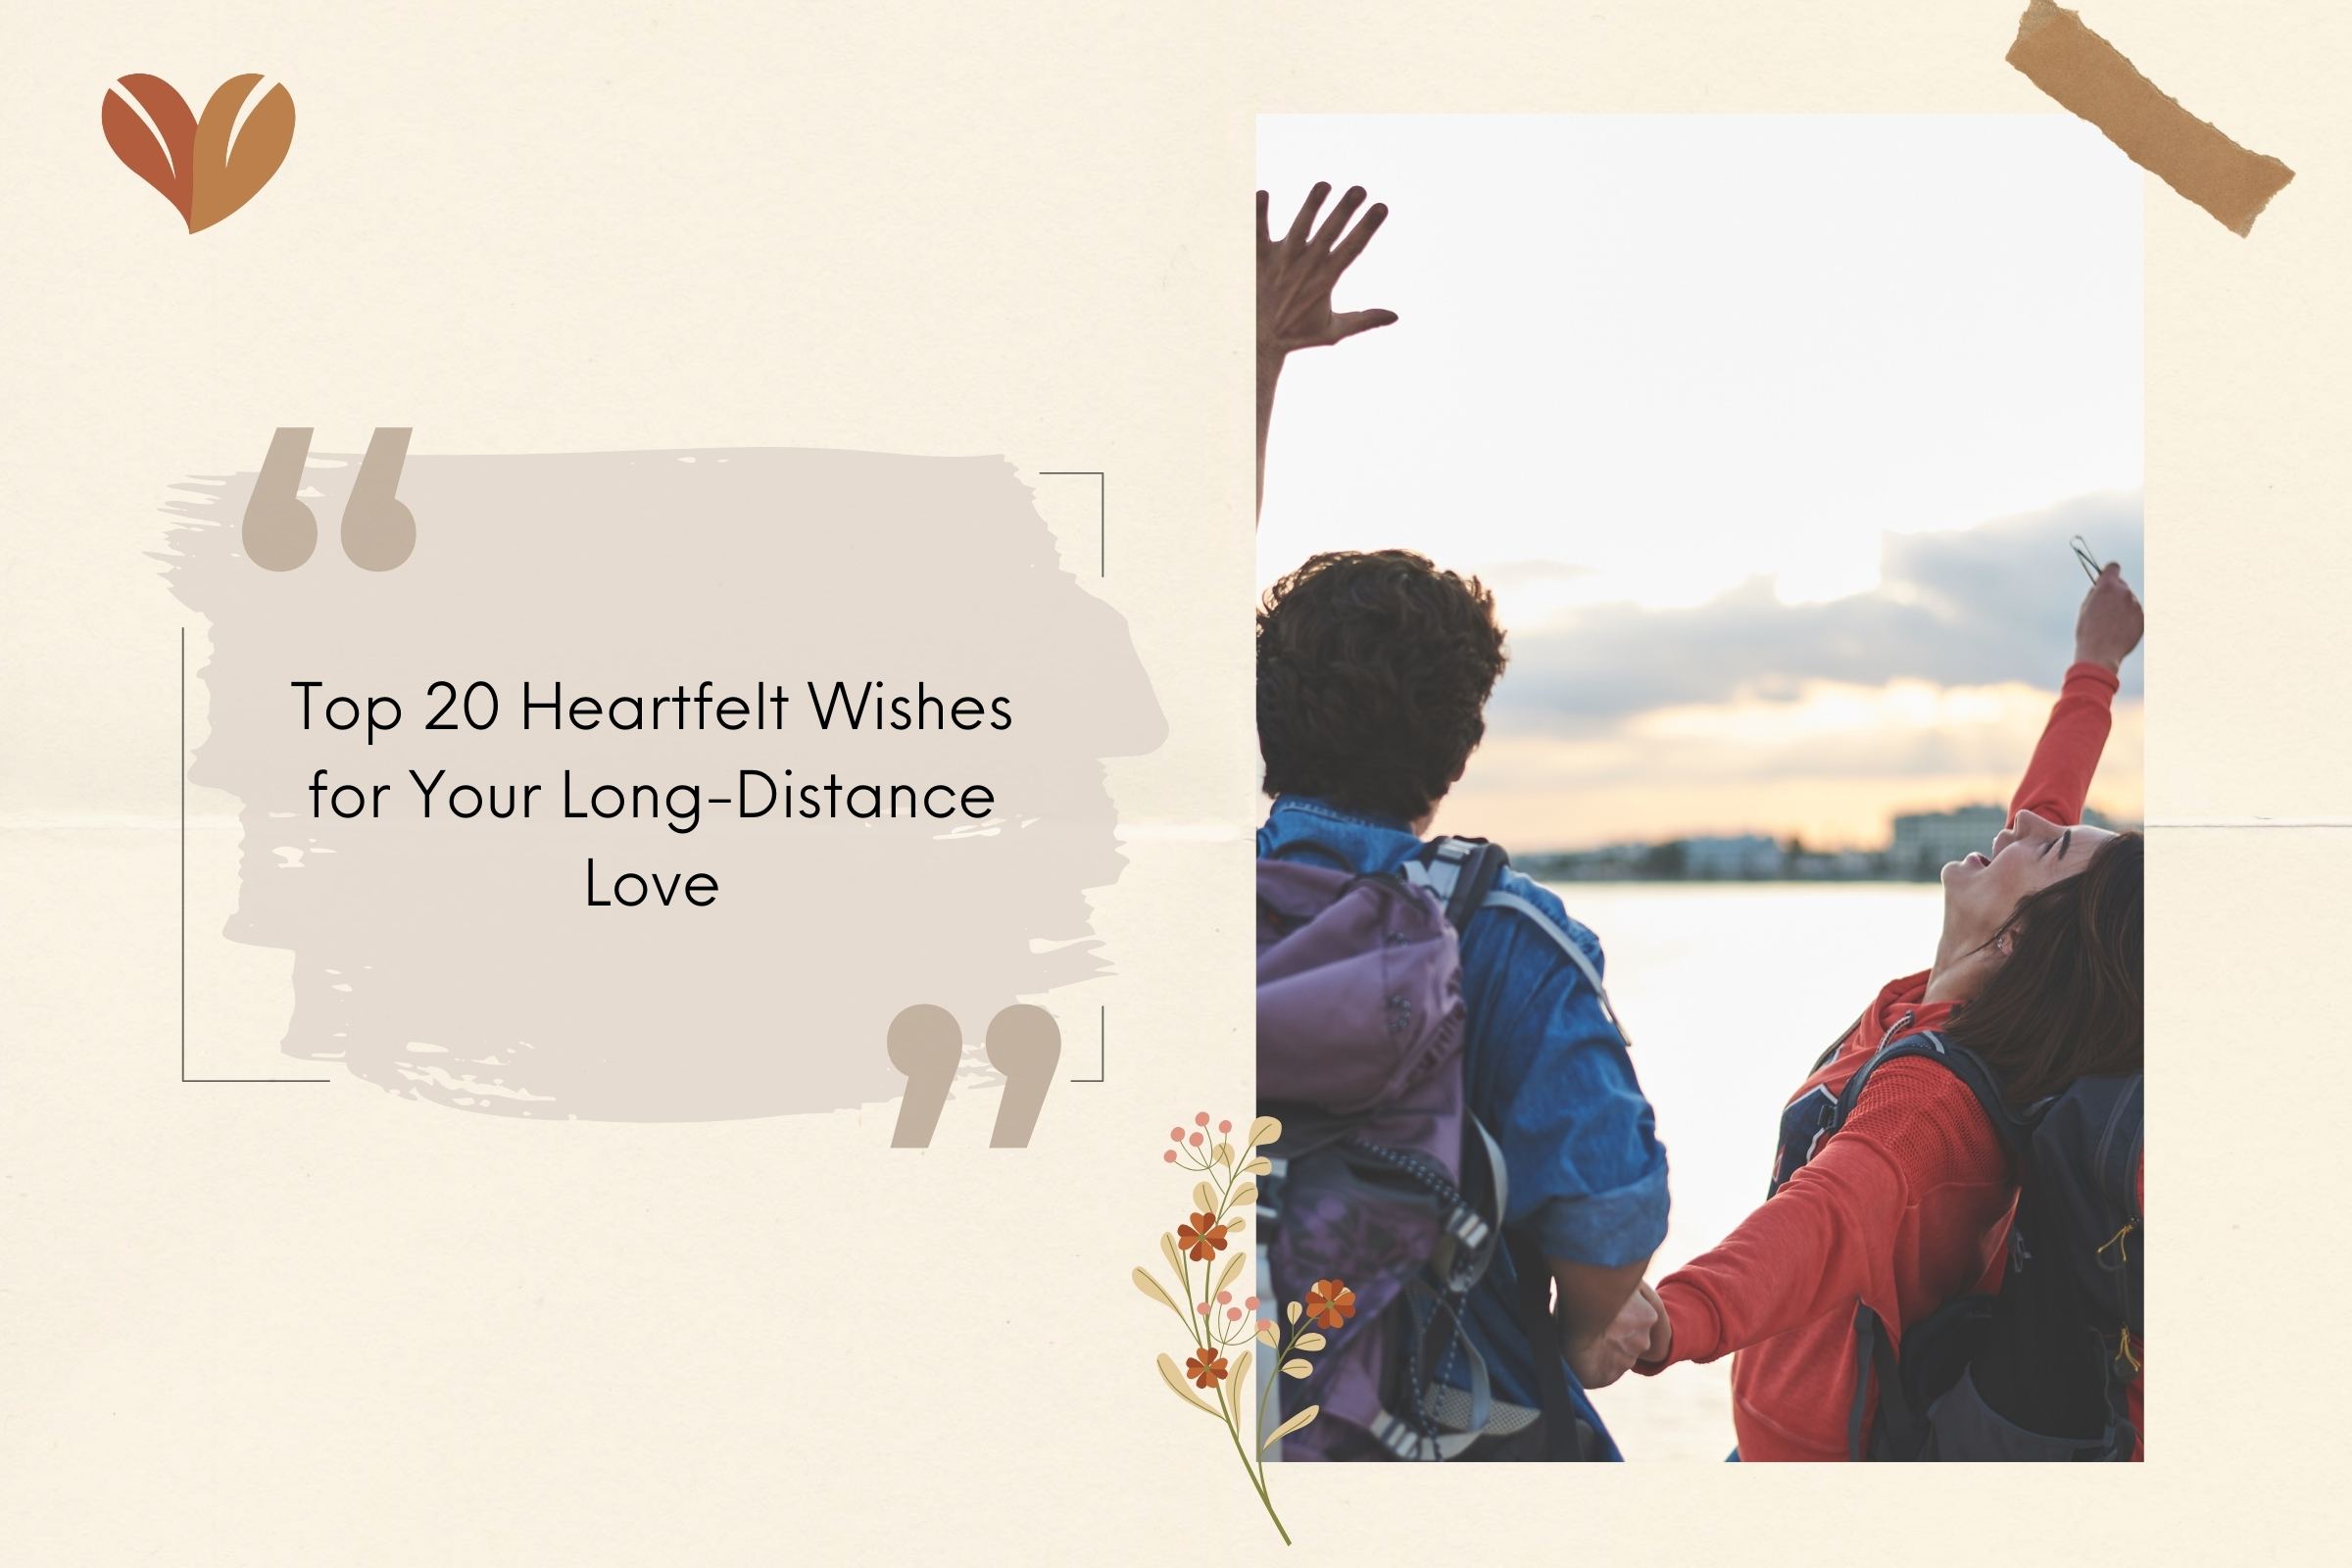 Top 20 Heartfelt Wishes for Your Long-Distance Love